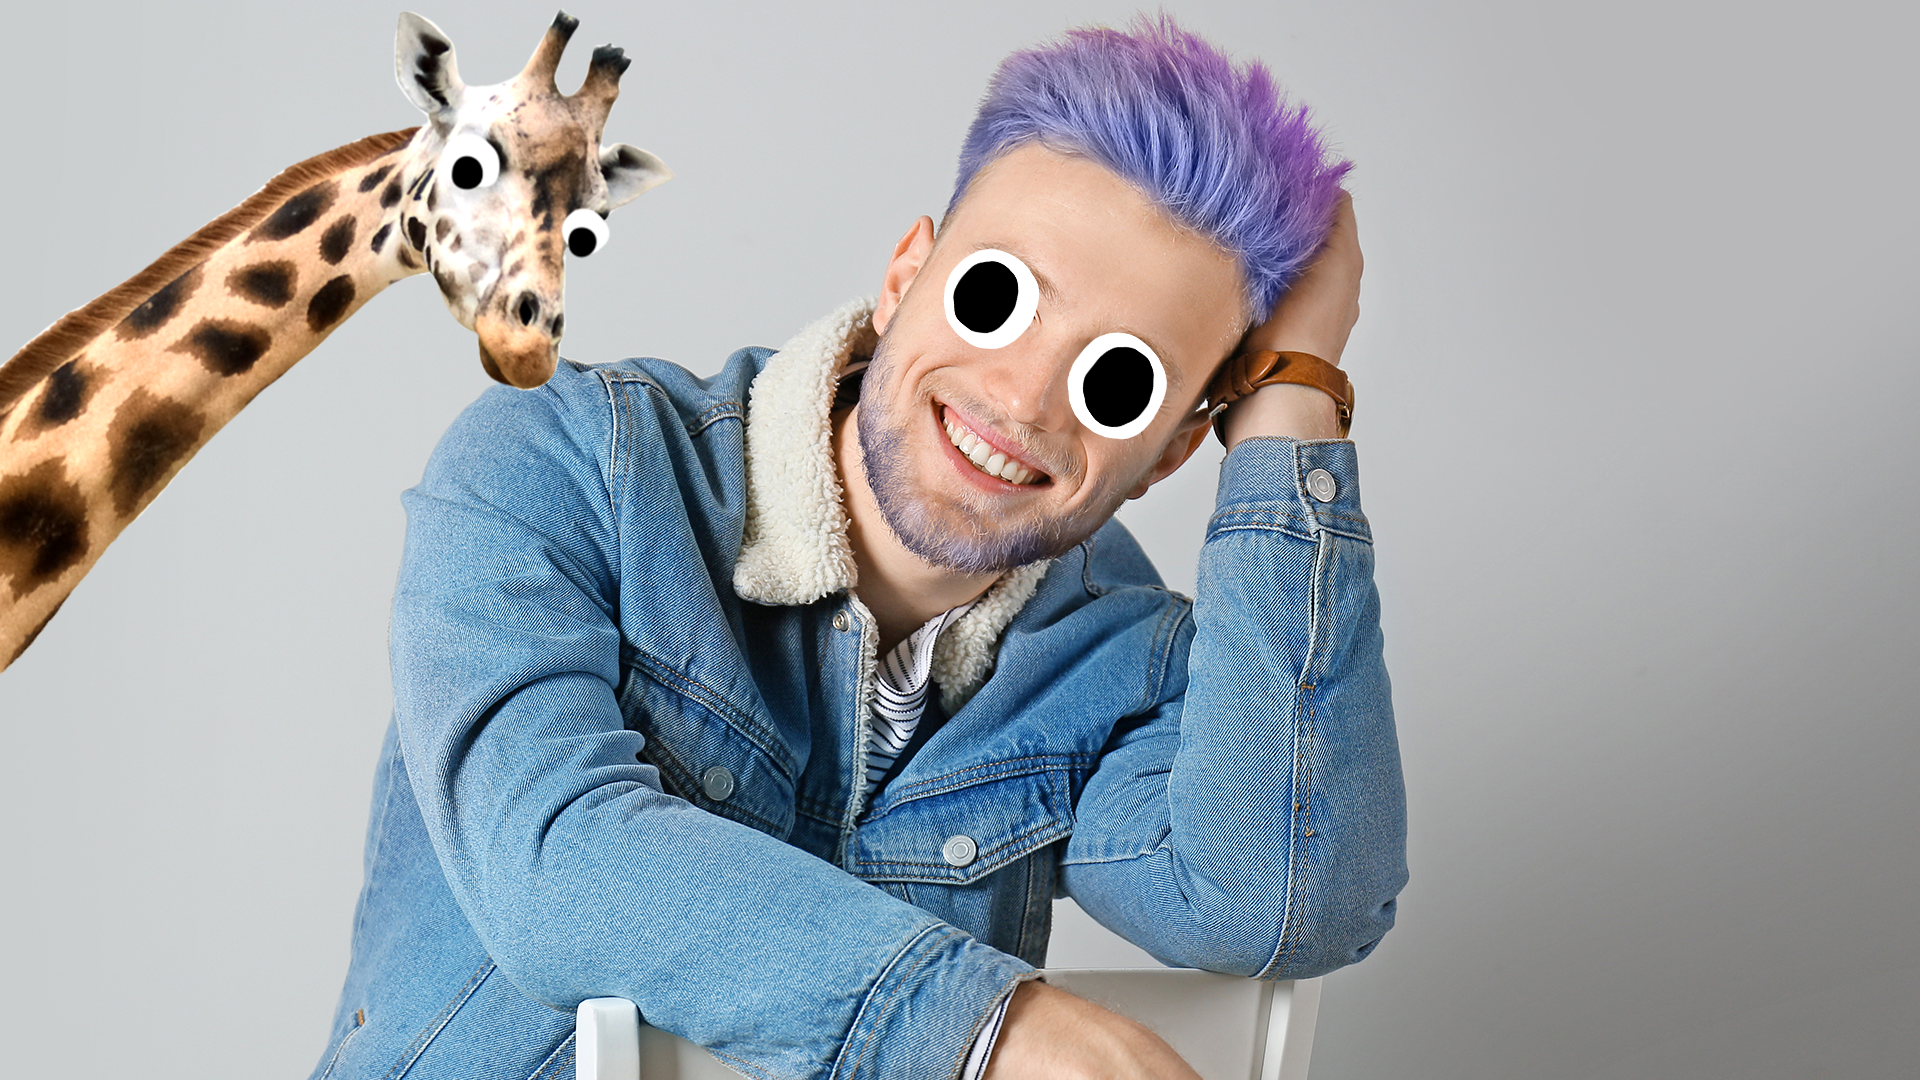 Man with dyed hair and Beano giraffe